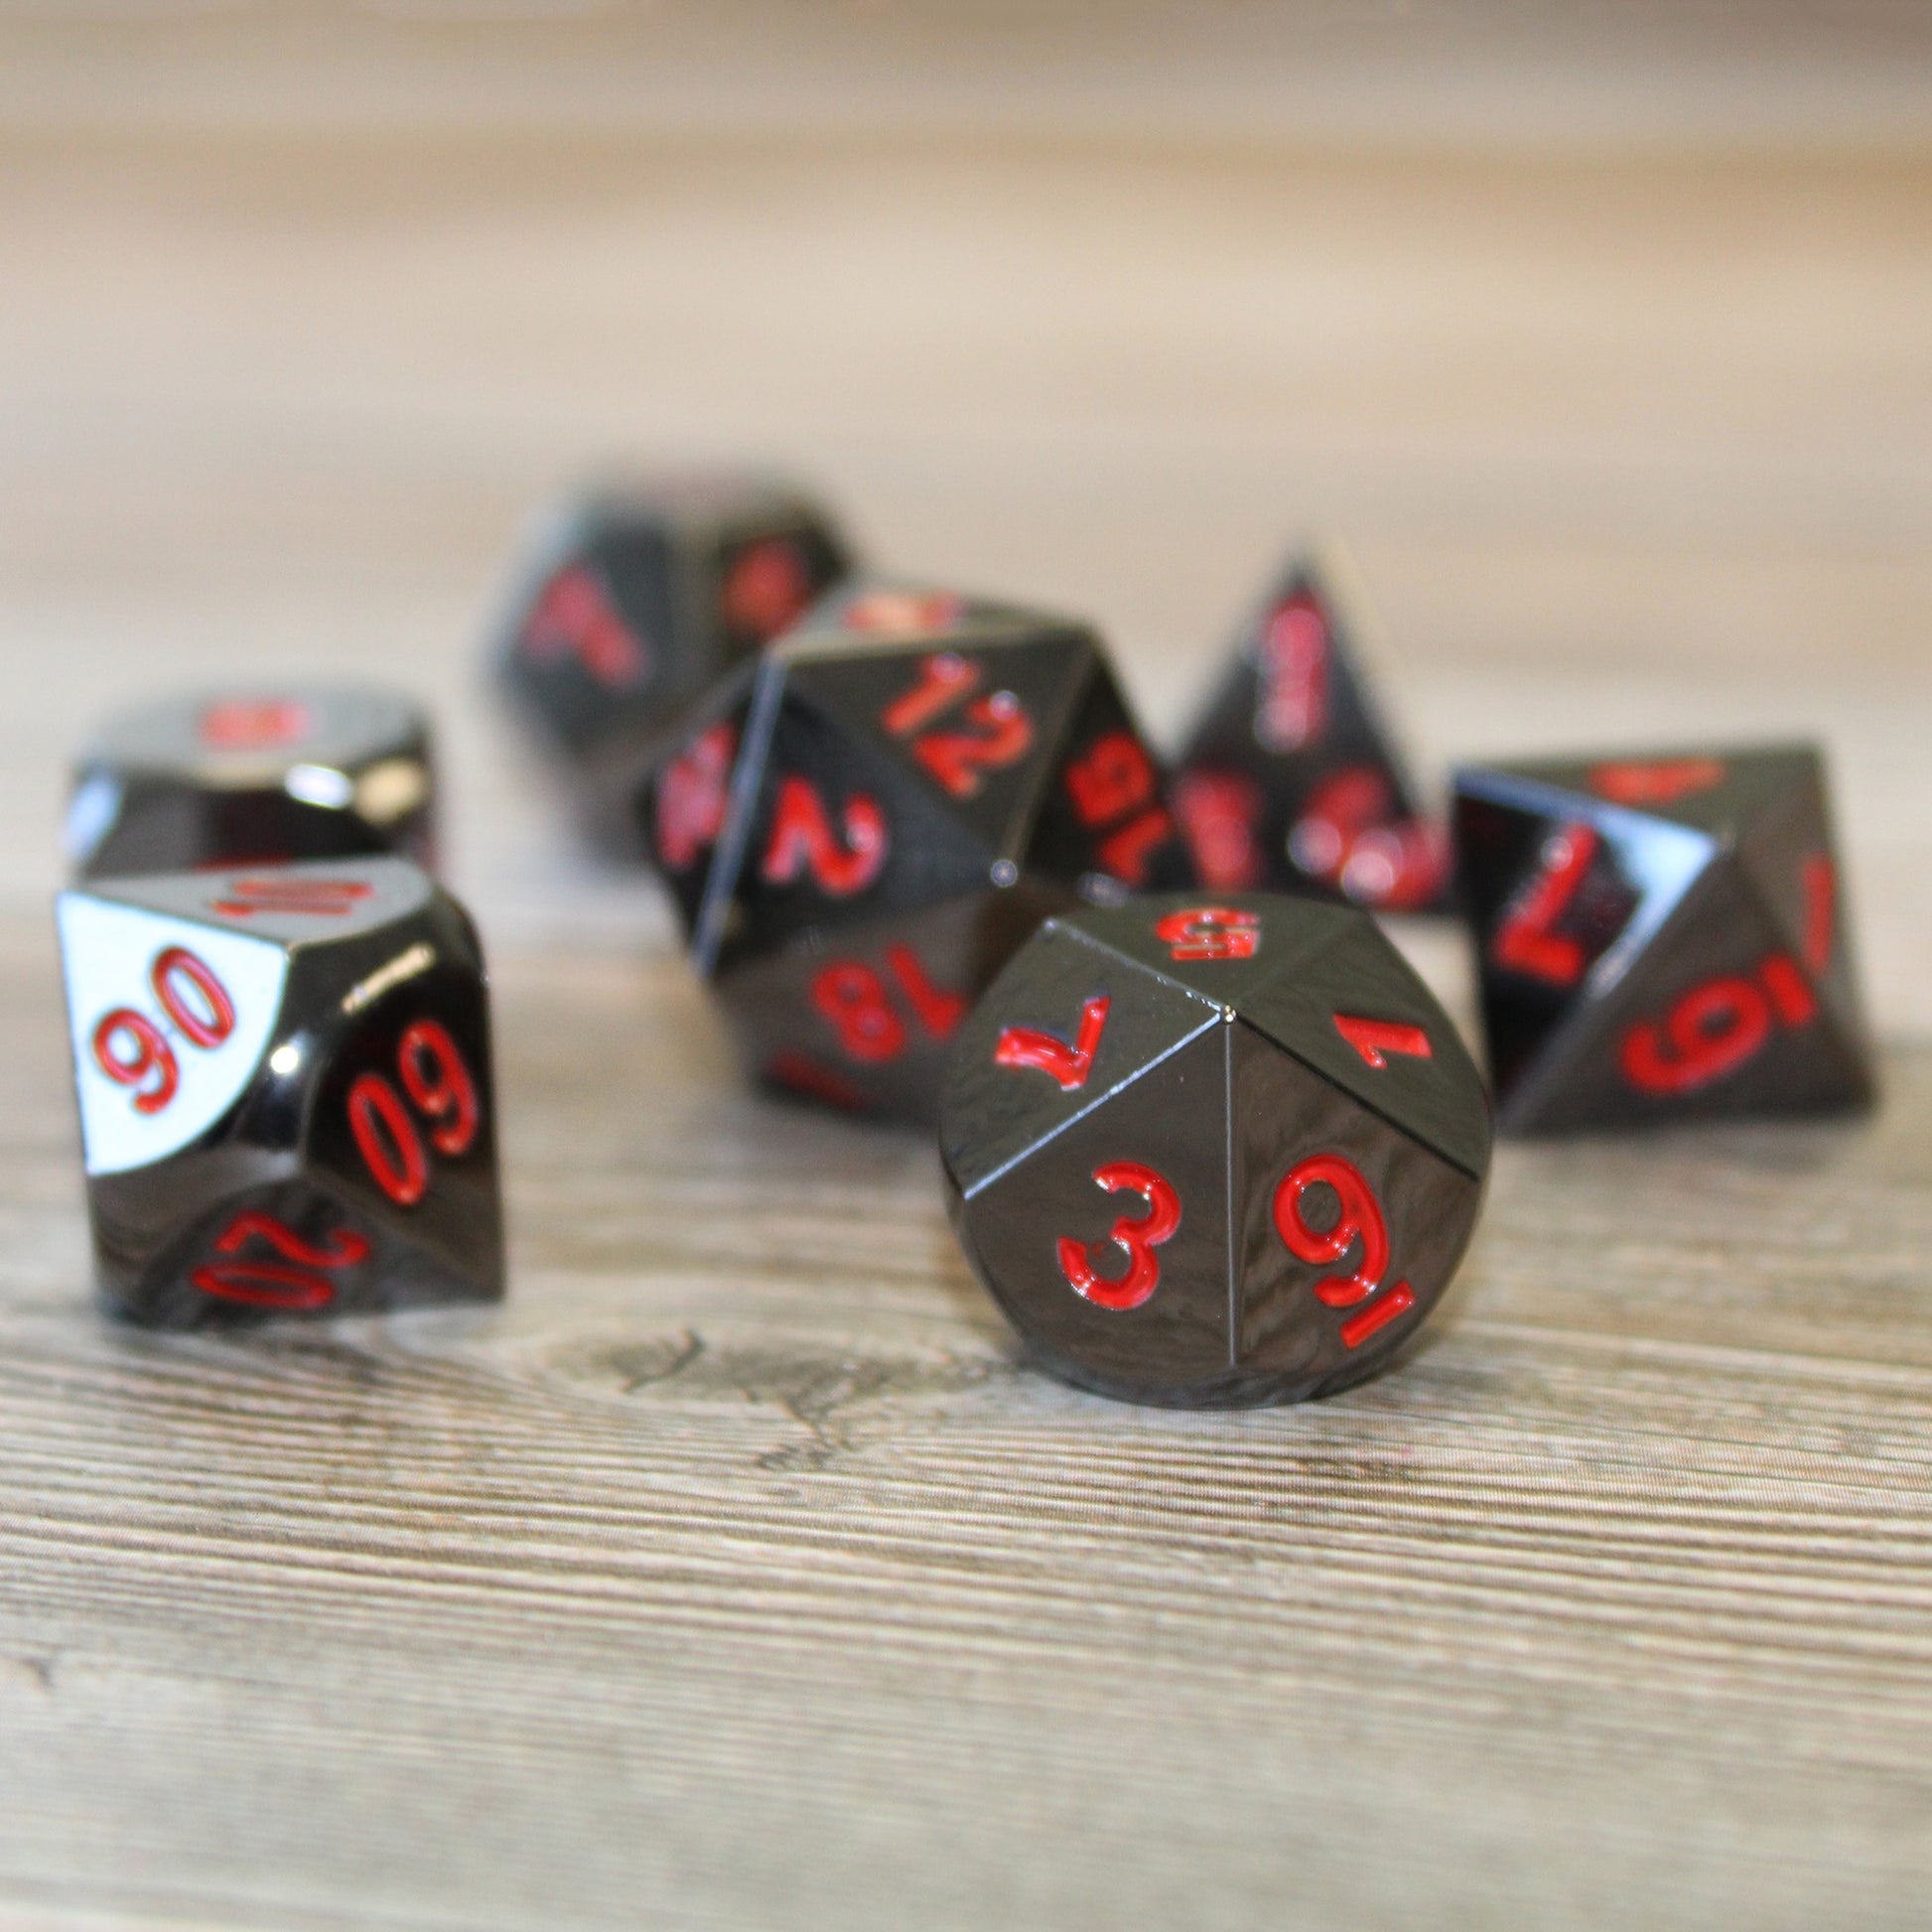 Black nickel dice set cast from Nickle-zinc alloy with red ink.